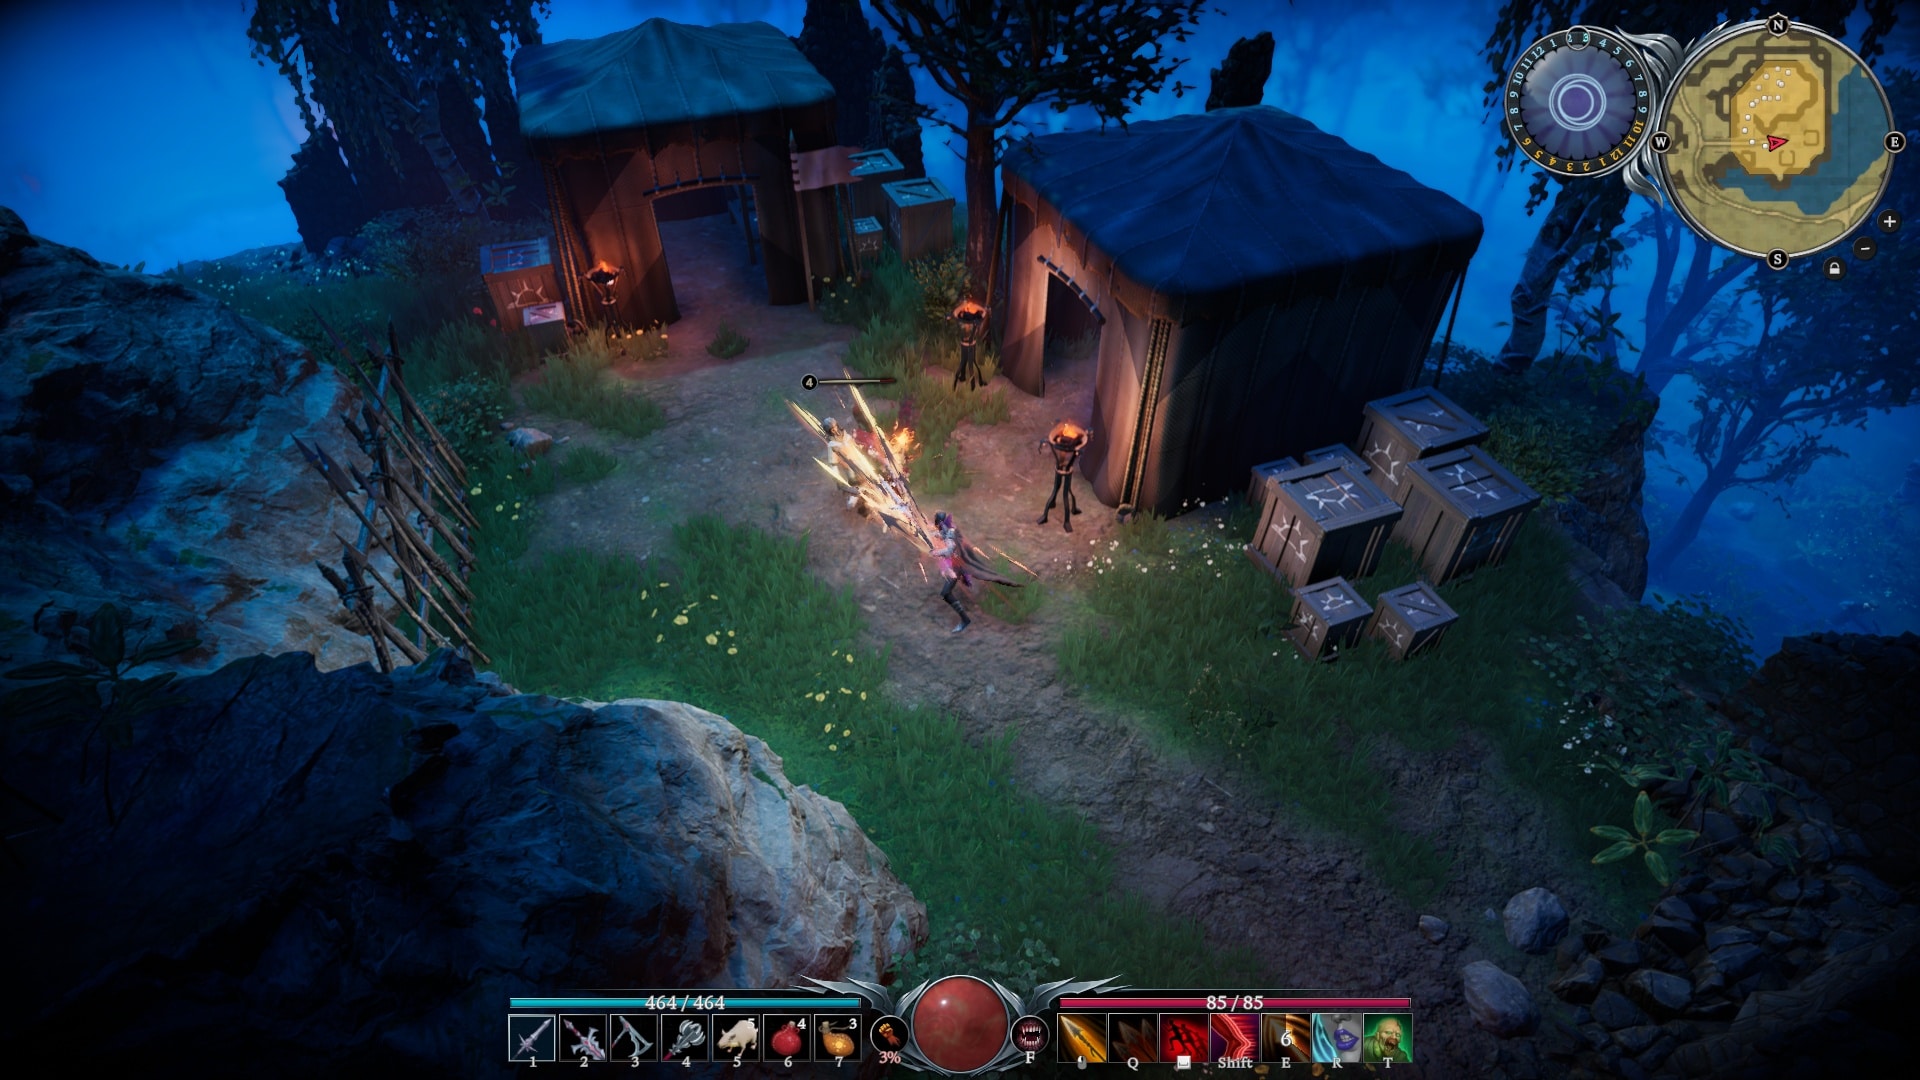 In V Rising, players will have a wide variety of ranged and melee weapons and spells at their disposal. The developers even plan to expand their arsenal.